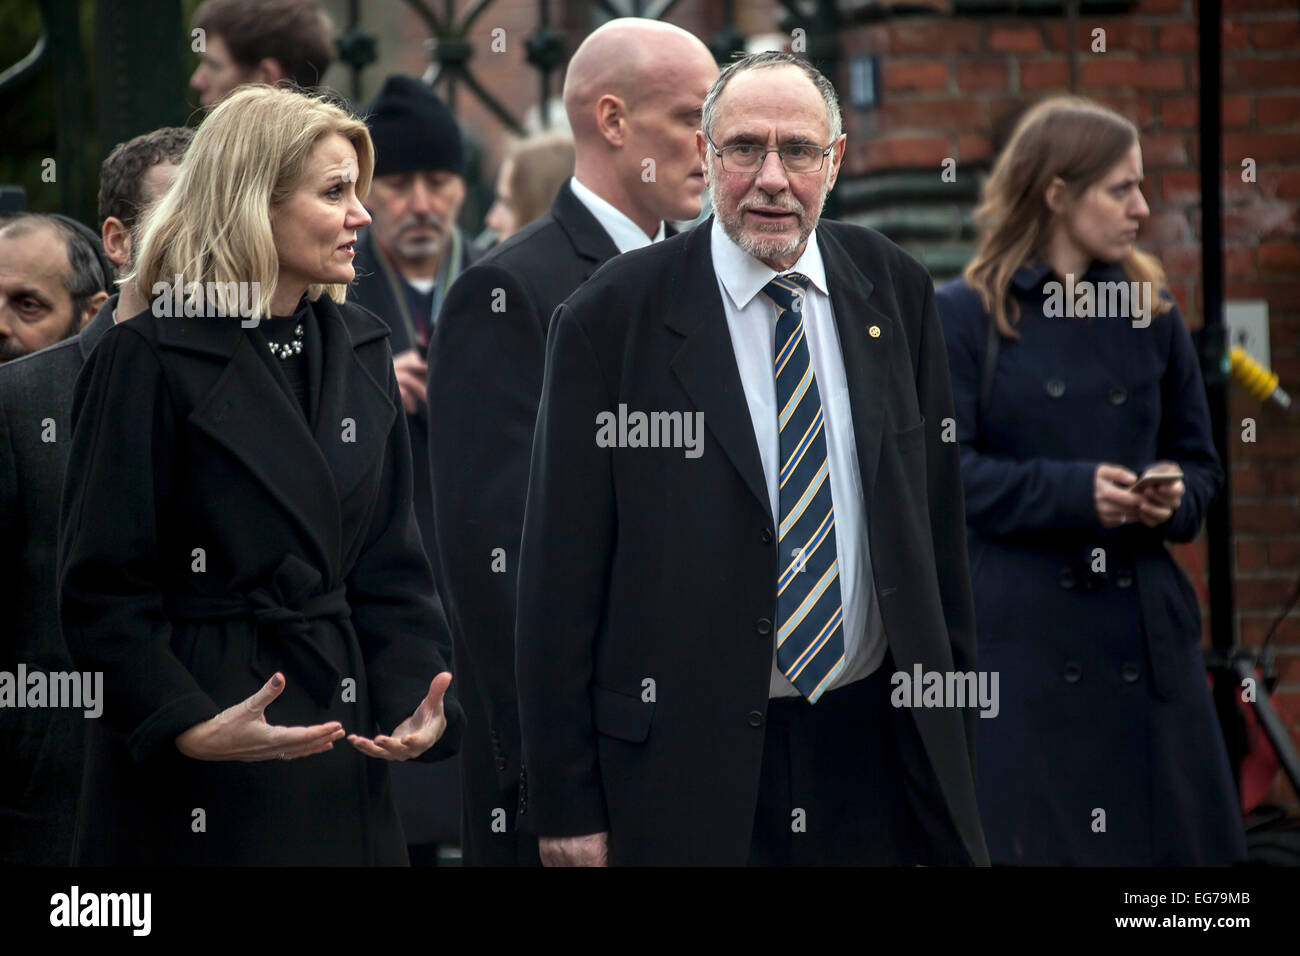 Copenhagen, Denmark. 18th February, 2015.  Danish Prime Minister, Helle Thorning-Schmidt, participates in the funeral ceremony of Jewish Dan Uzan, who was murdered by a terrorist at the Jewish synagogue in Copenhagen early Sunday morning. Credit:  OJPHOTOS/Alamy Live News Stock Photo